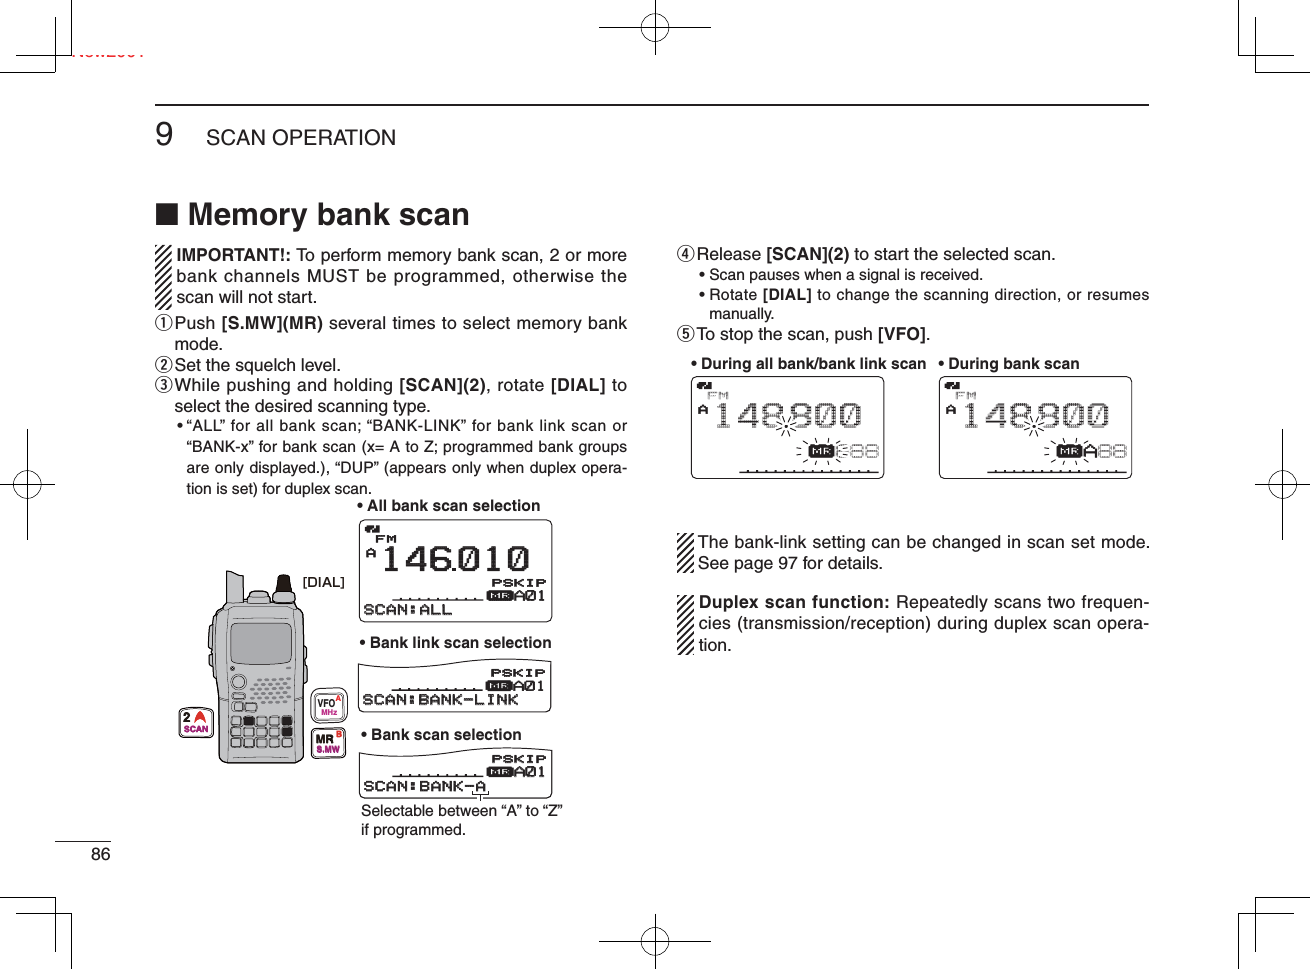 Ne869SCAN OPERATIONNew2001■ Memory bank scan   IMPORTANT!: To perform memory bank scan, 2 or more  bank channels MUST be programmed, otherwise the scan will not start.q  Push [S.MW](MR) several times to select memory bank mode.w Set the squelch level.e  While pushing and holding [SCAN](2), rotate [DIAL] to select the desired scanning type.•  “ALL” for all bank scan; “BANK-LINK” for bank link scan or “BANK-x” for bank scan (x= A to Z; programmed bank groups  are only displayed.), “DUP” (appears only when duplex opera-tion is set) for duplex scan.r Release  [SCAN](2) to start the selected scan.• Scan pauses when a signal is received.•  Rotate [DIAL] to change the scanning direction, or resumes manually.t To stop the scan, push [VFO].  The bank-link setting can be changed in scan set mode. See page 97 for details.  Duplex scan function: Repeatedly scans two frequen-cies (transmission/reception) during duplex scan opera-tion.FMA146010μA01A01SCAN:ALLSCAN:ALLFMA148800μA01SCAN:BANK-LINKSCAN:BANK-LINKFMA148800μA01A01SCAN:BANK-ASCAN:BANK-APSKIPSKIPPSKIPSKIPPSKIPSKIP• All bank scan selection• Bank scan selection• Bank link scan selectionSelectable between “A” to “Z” if programmed.[DIAL]VFOMHzAMRS.MWB2SCANFMAμ888148800• During all bank/bank link scan • During bank scanFMAμA88148800